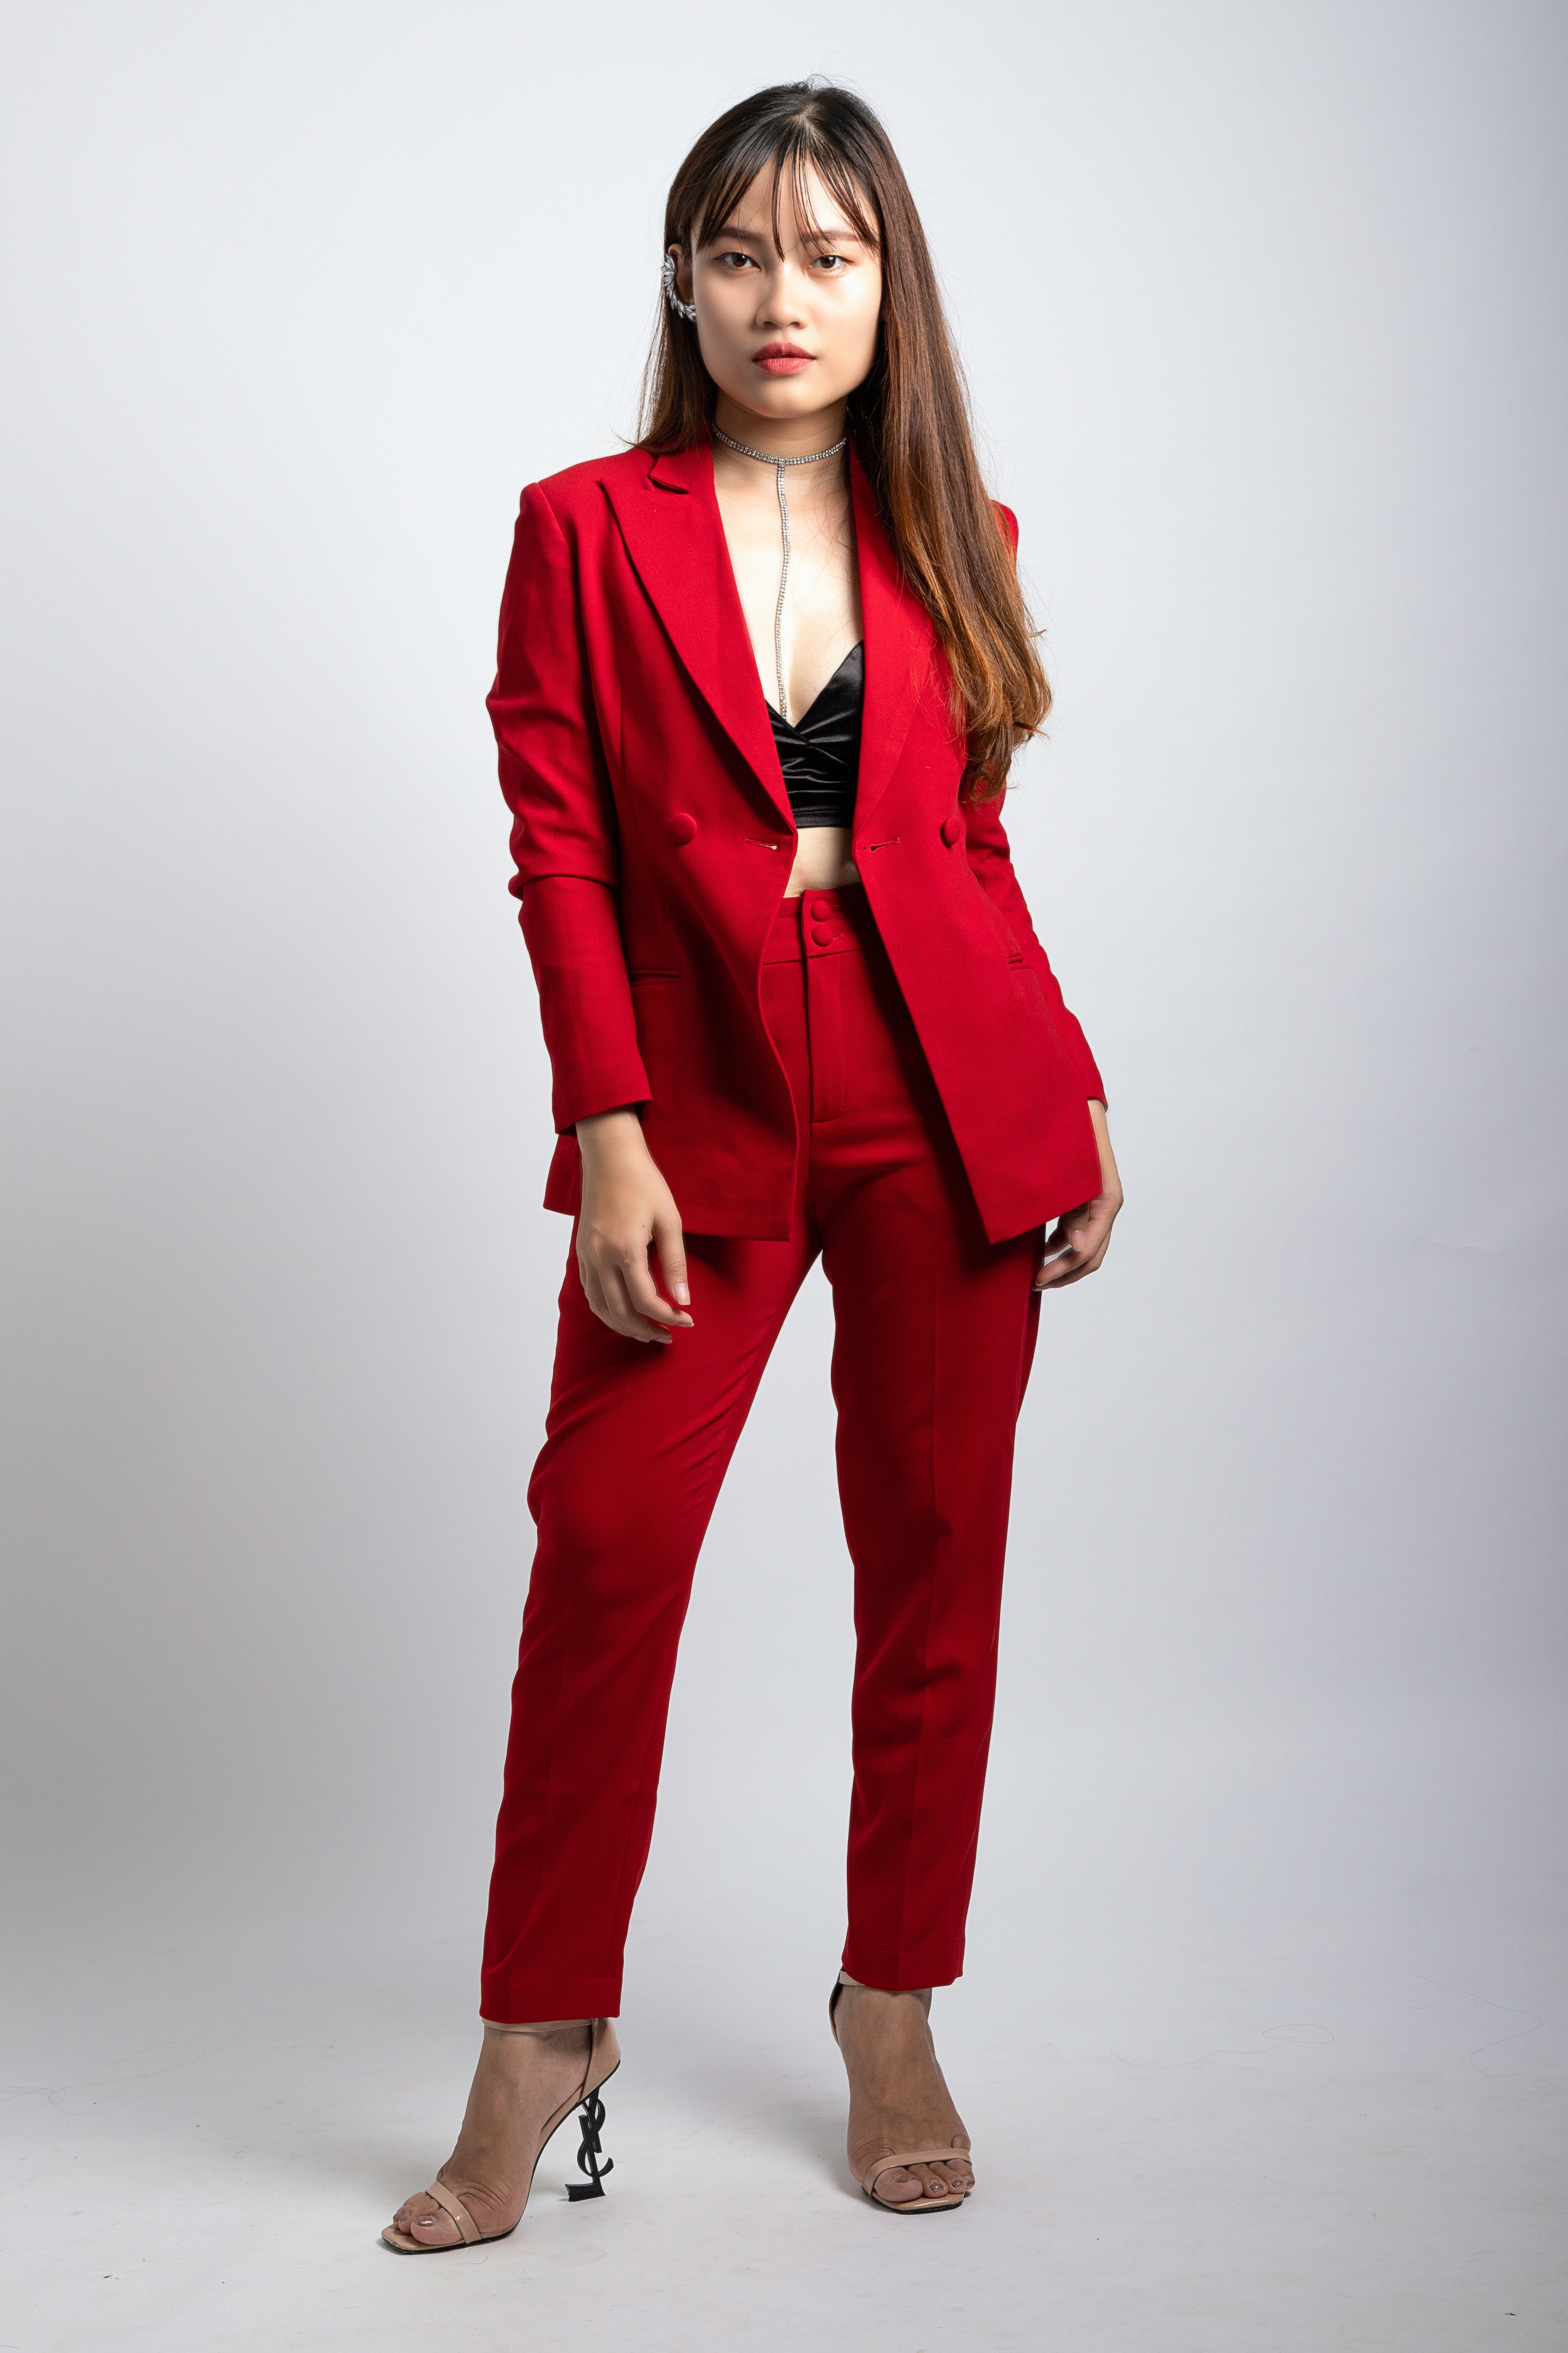 Woman Wearing Red Coat and Dress Pants Standing in Front of White Wallpaper · Free